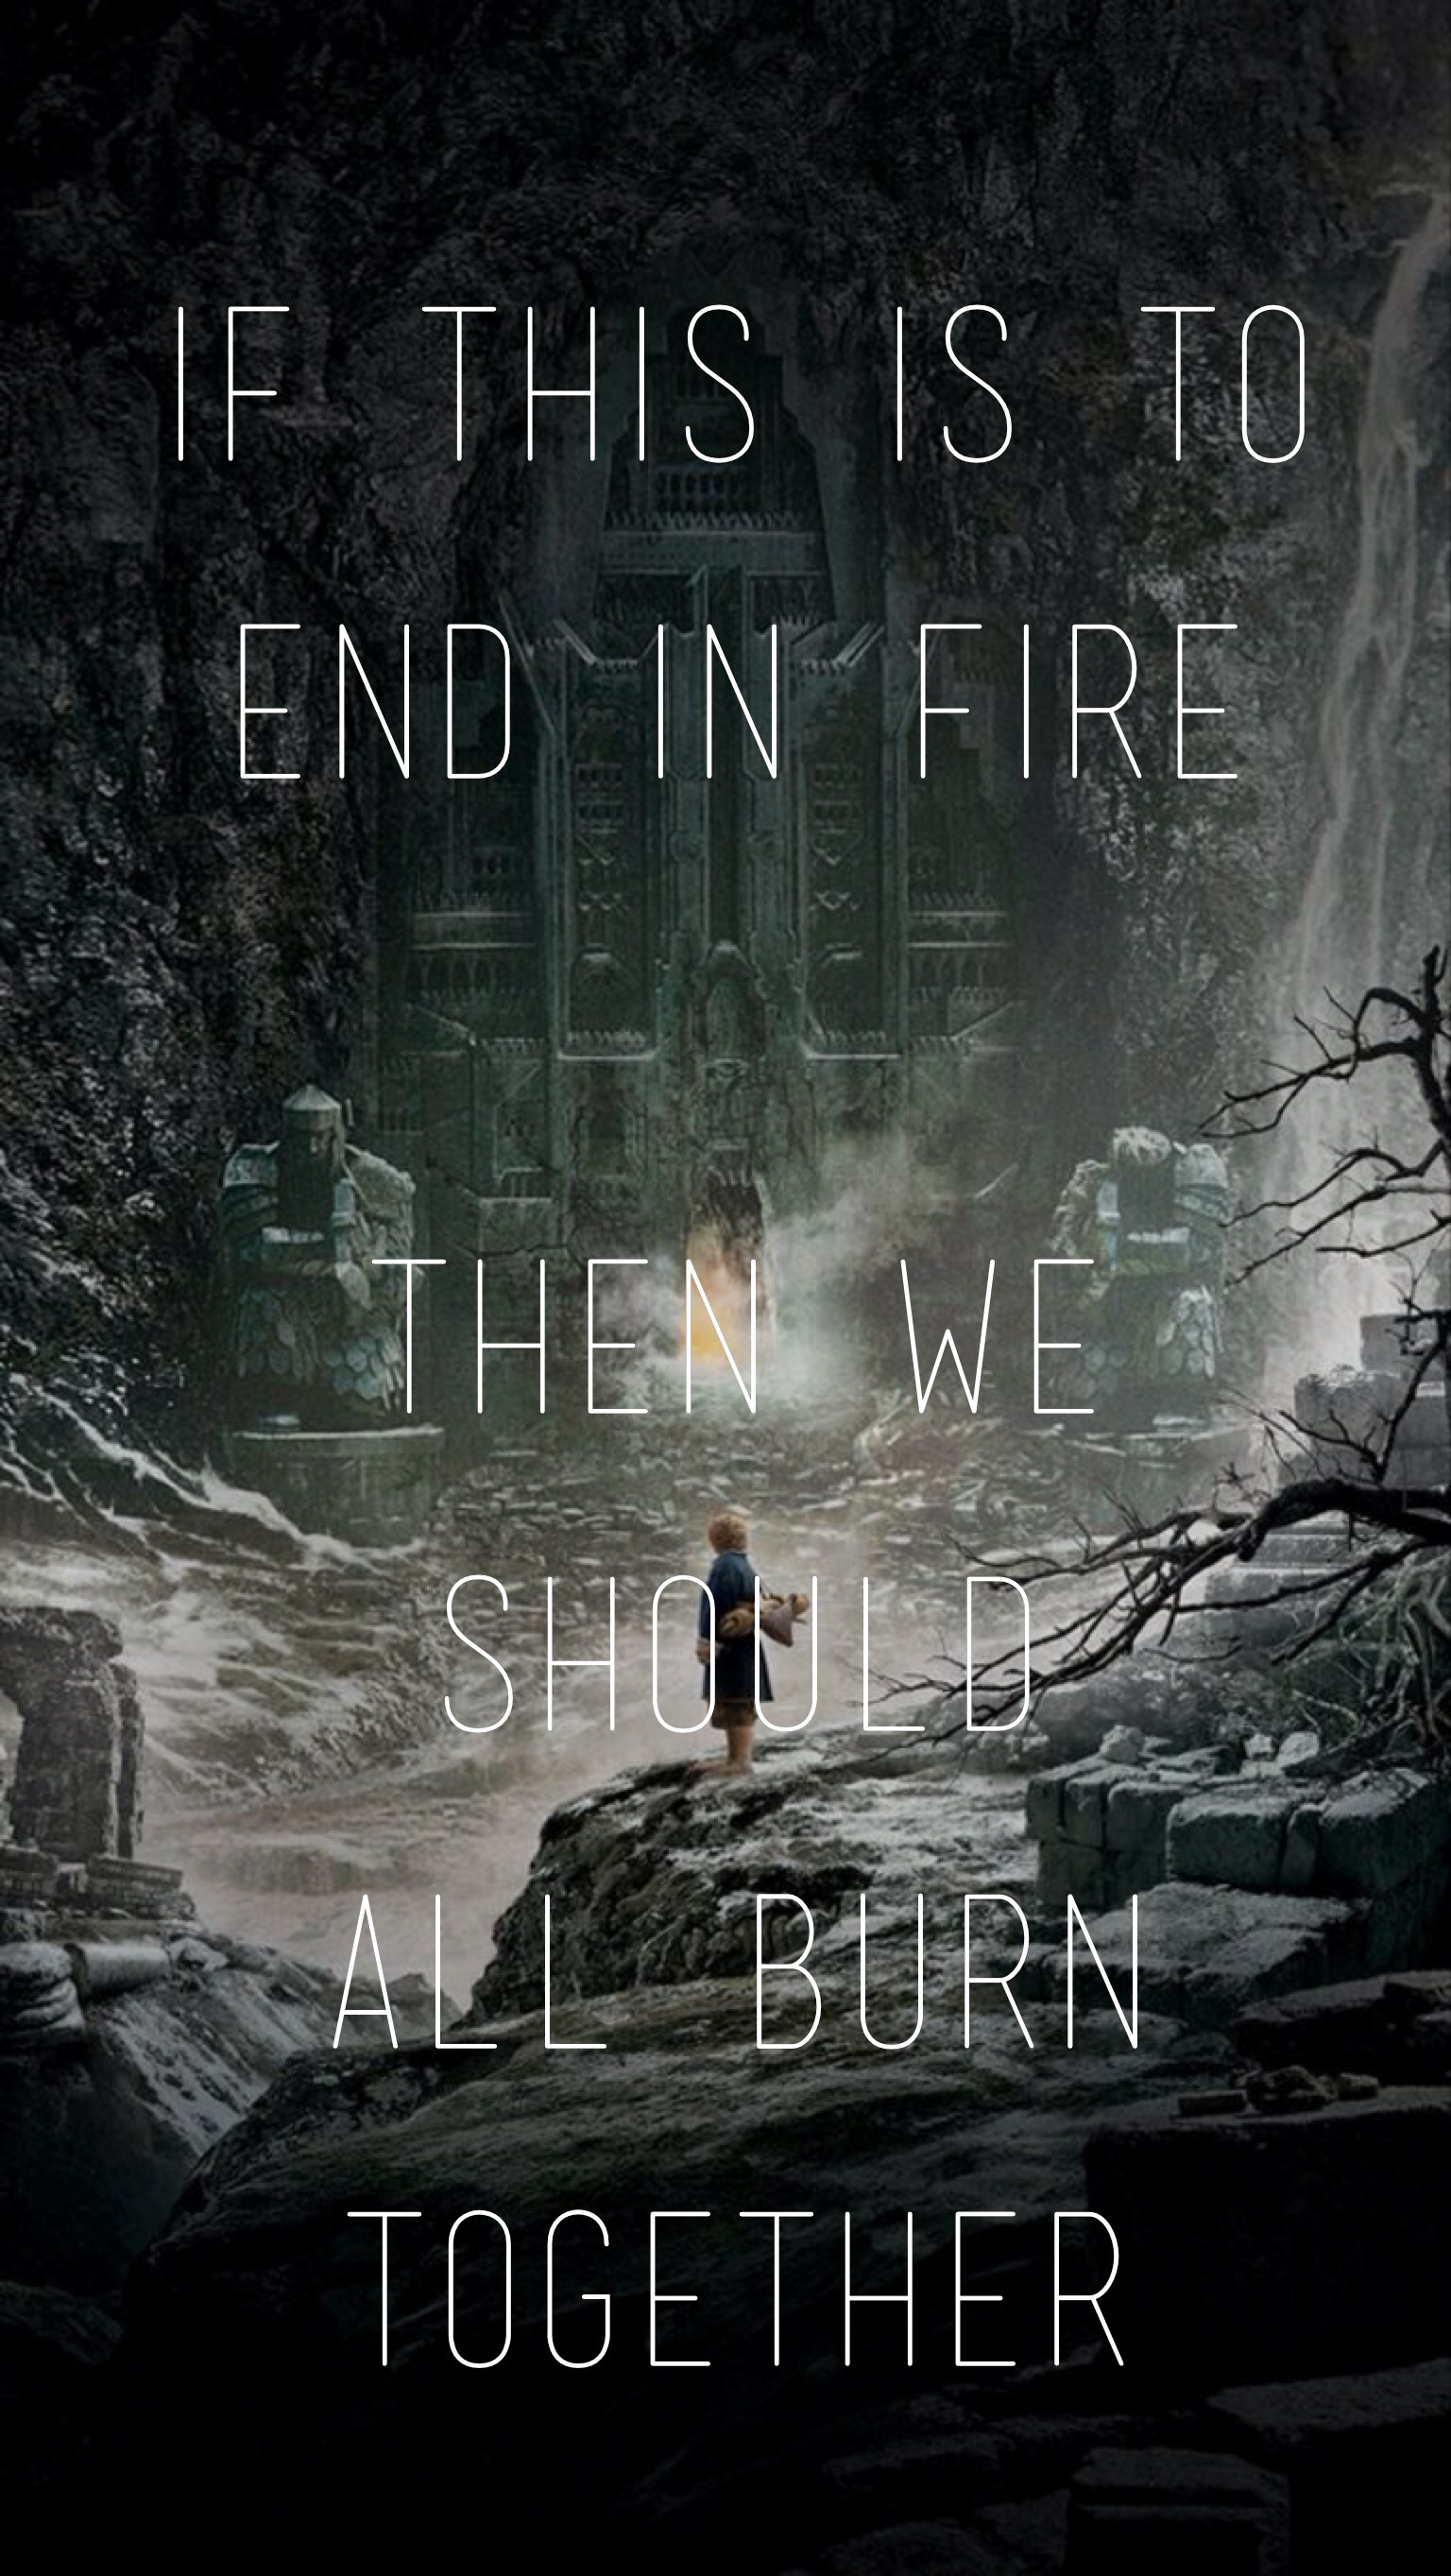 1536x2726 I See Fire - Ed Sheeran, I am totally obsessed with this song